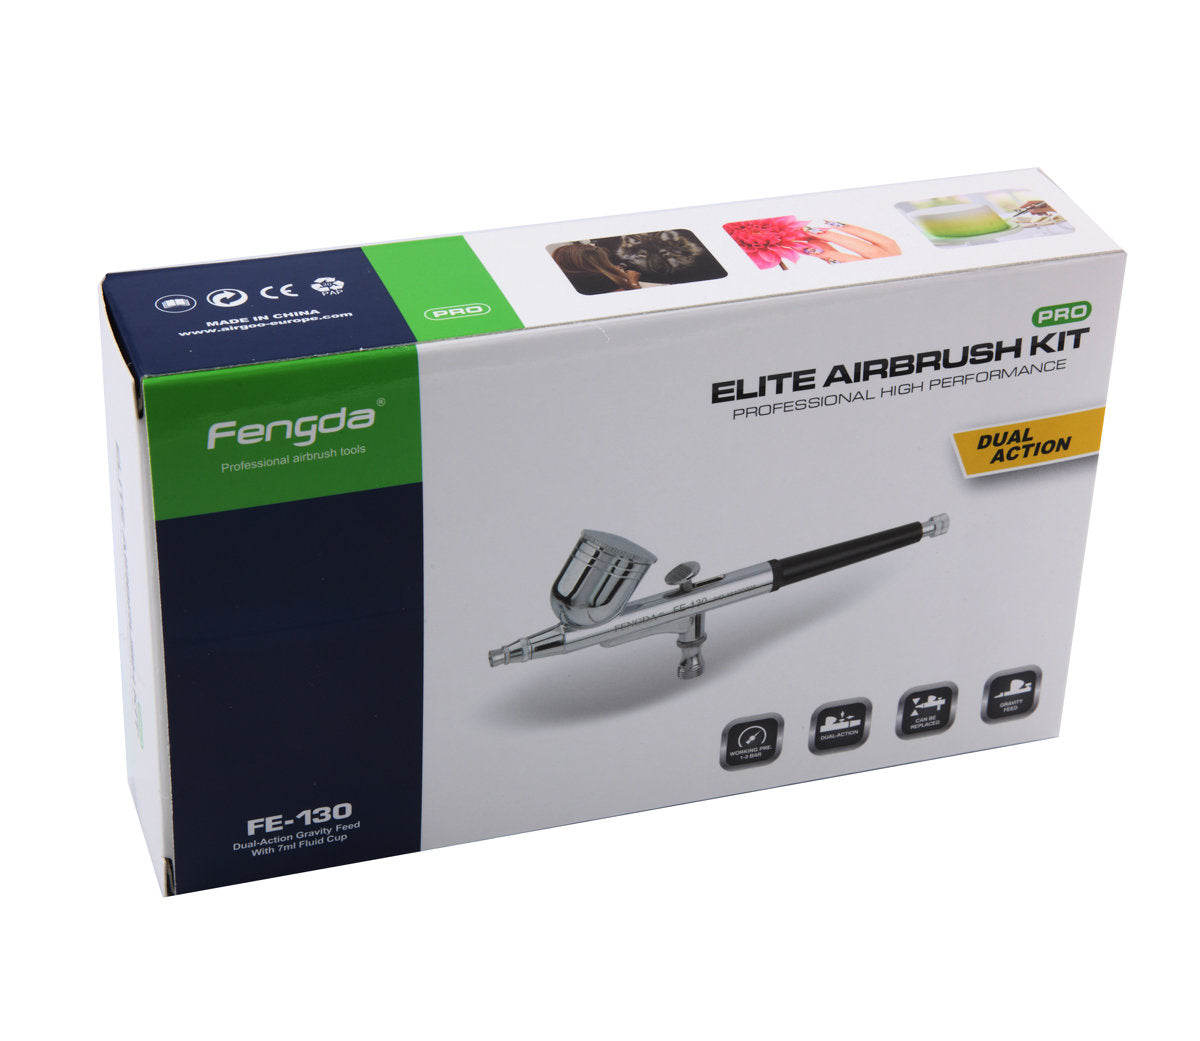 Fengda - BD-130 : Dual Action Gravity Feed Airbrush 0,3 mm Nozzle